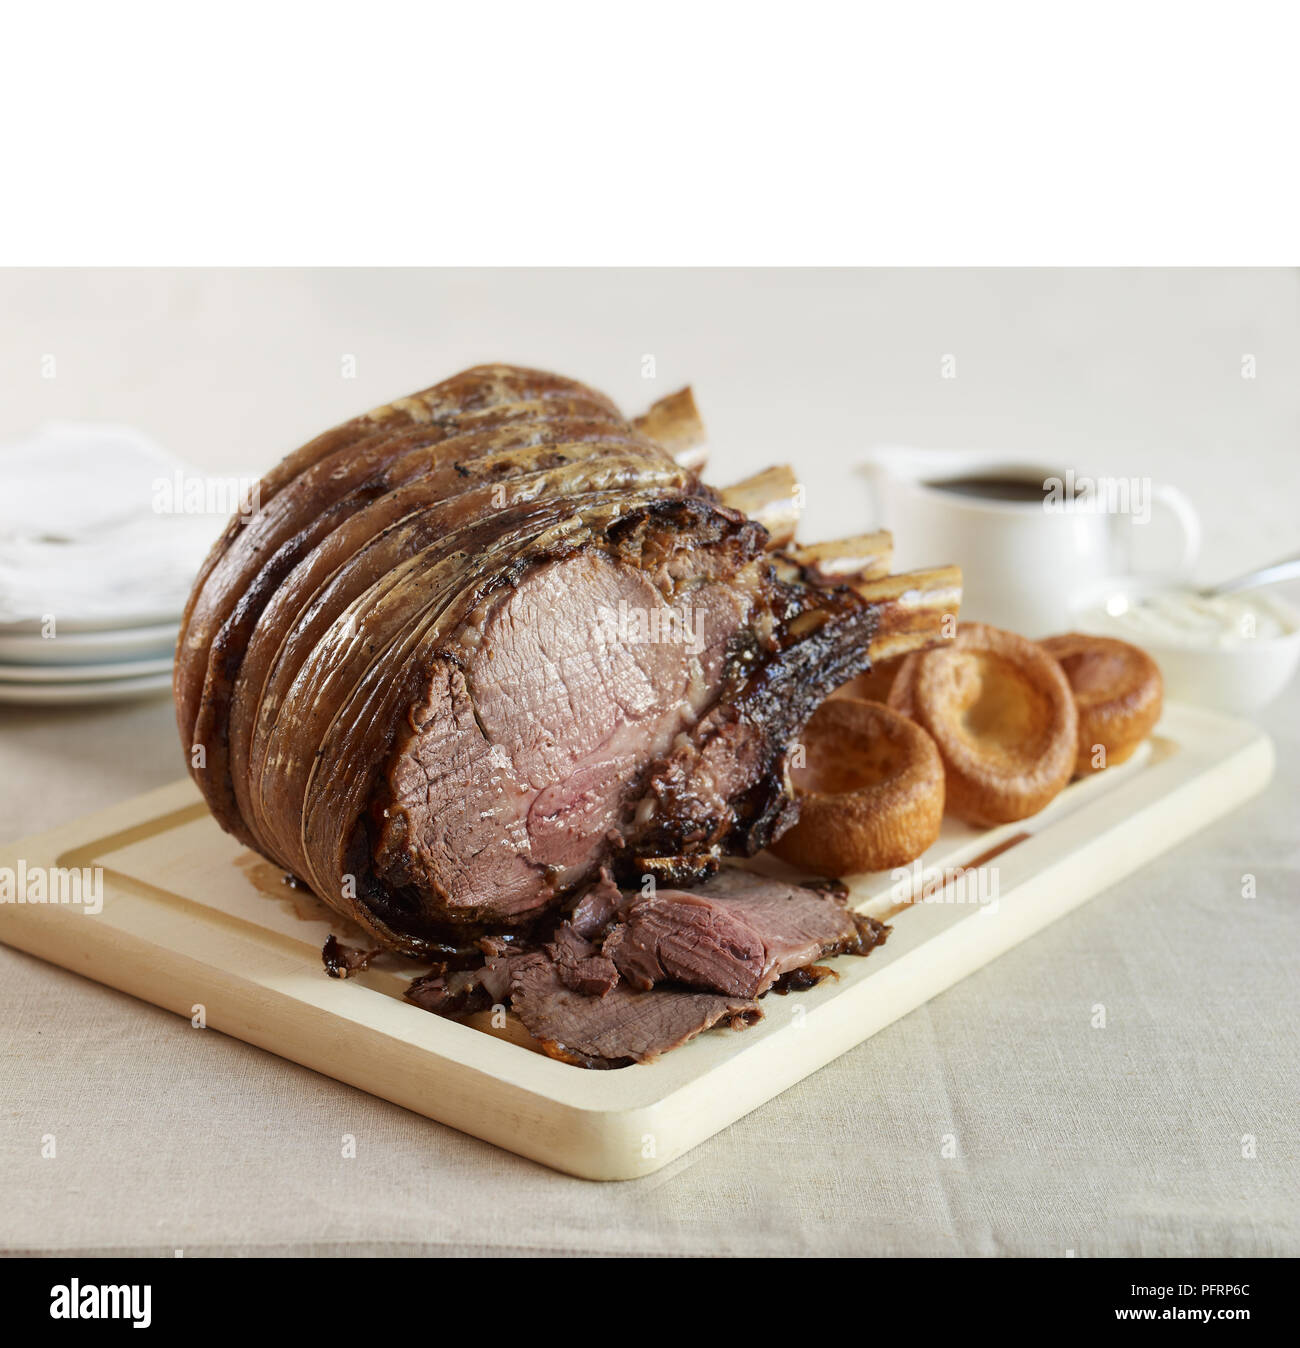 Roast beef with Yorkshire puddings Stock Photo